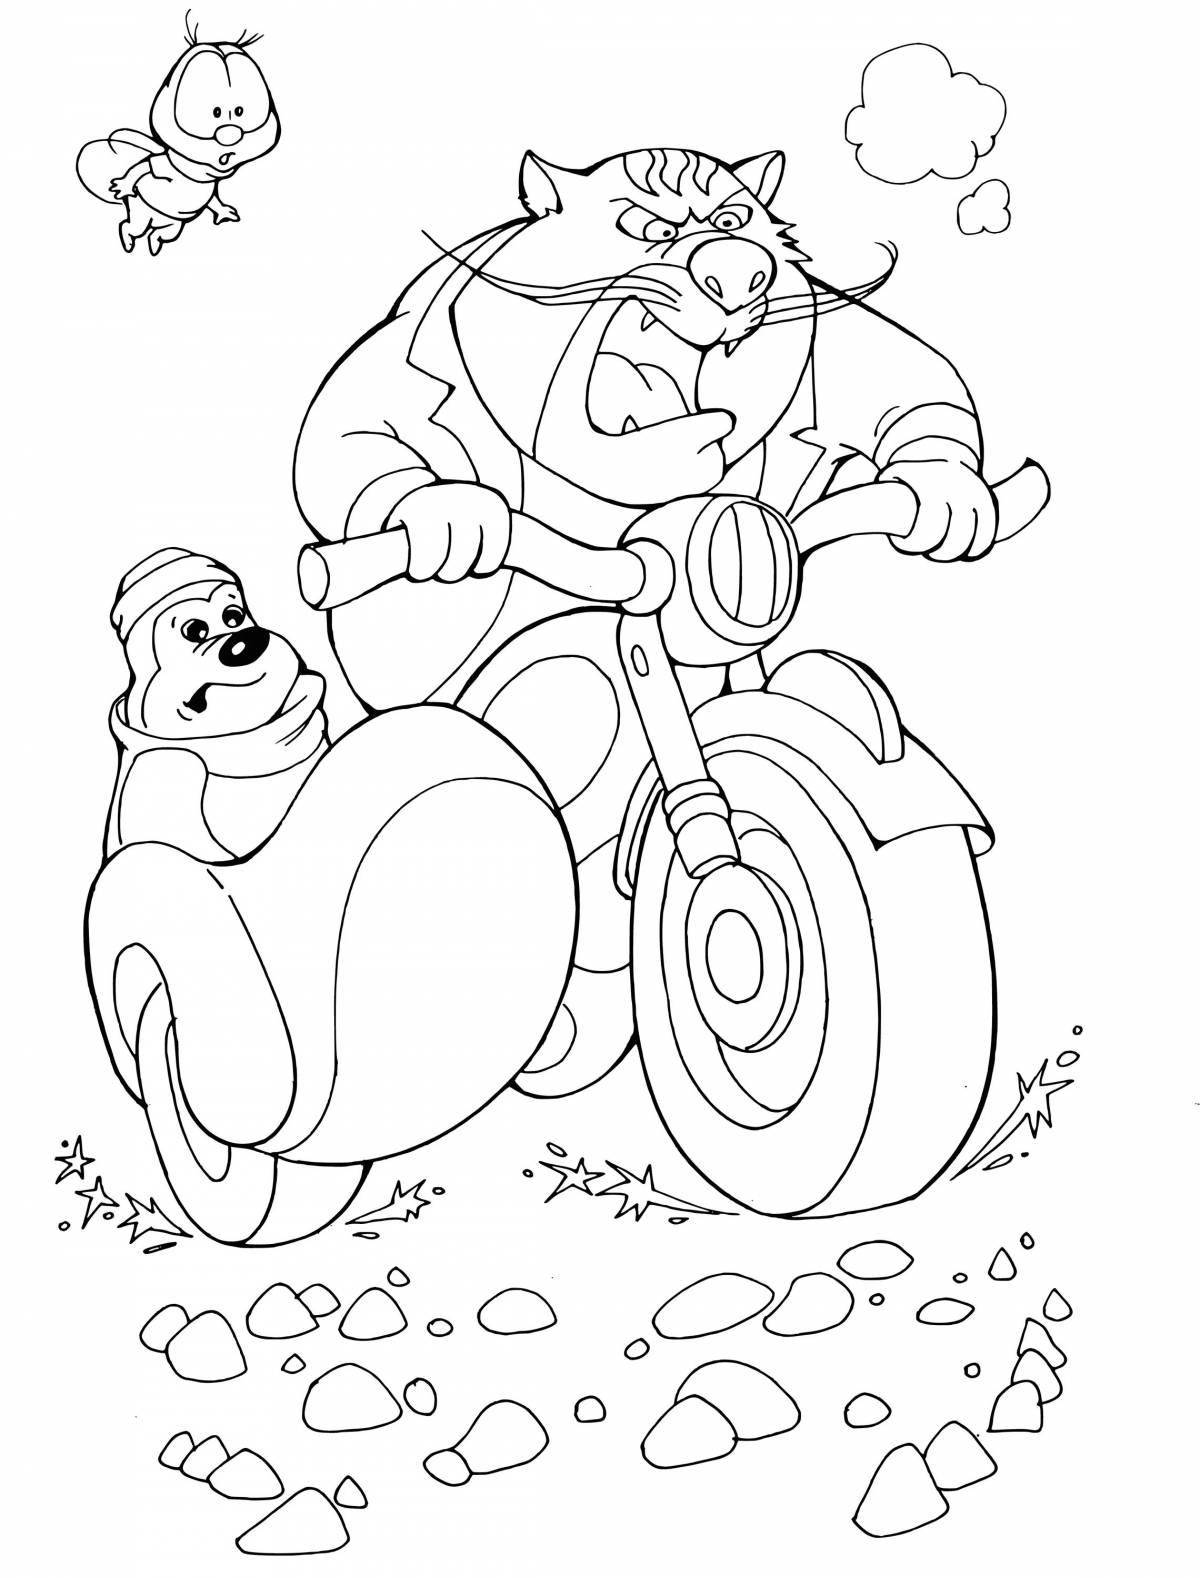 Cute chip and dale save the rangers coloring book